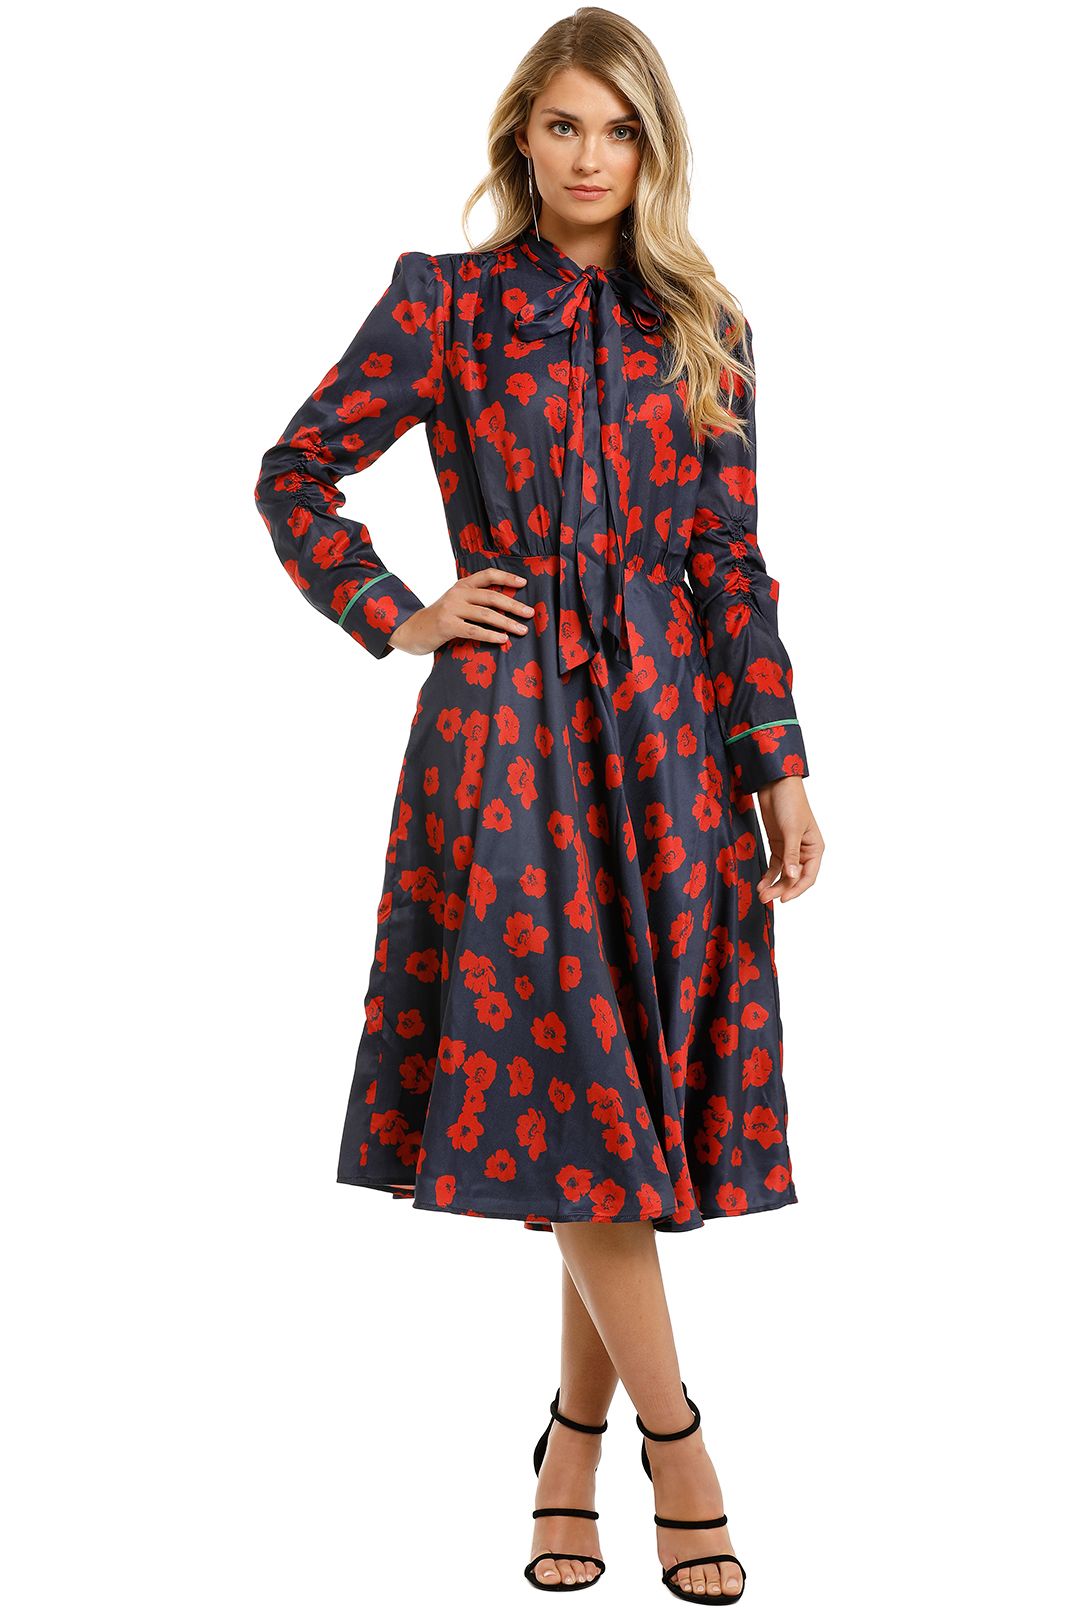 Grace-Willow-River-Dress-Red-Poppy-Print-Front